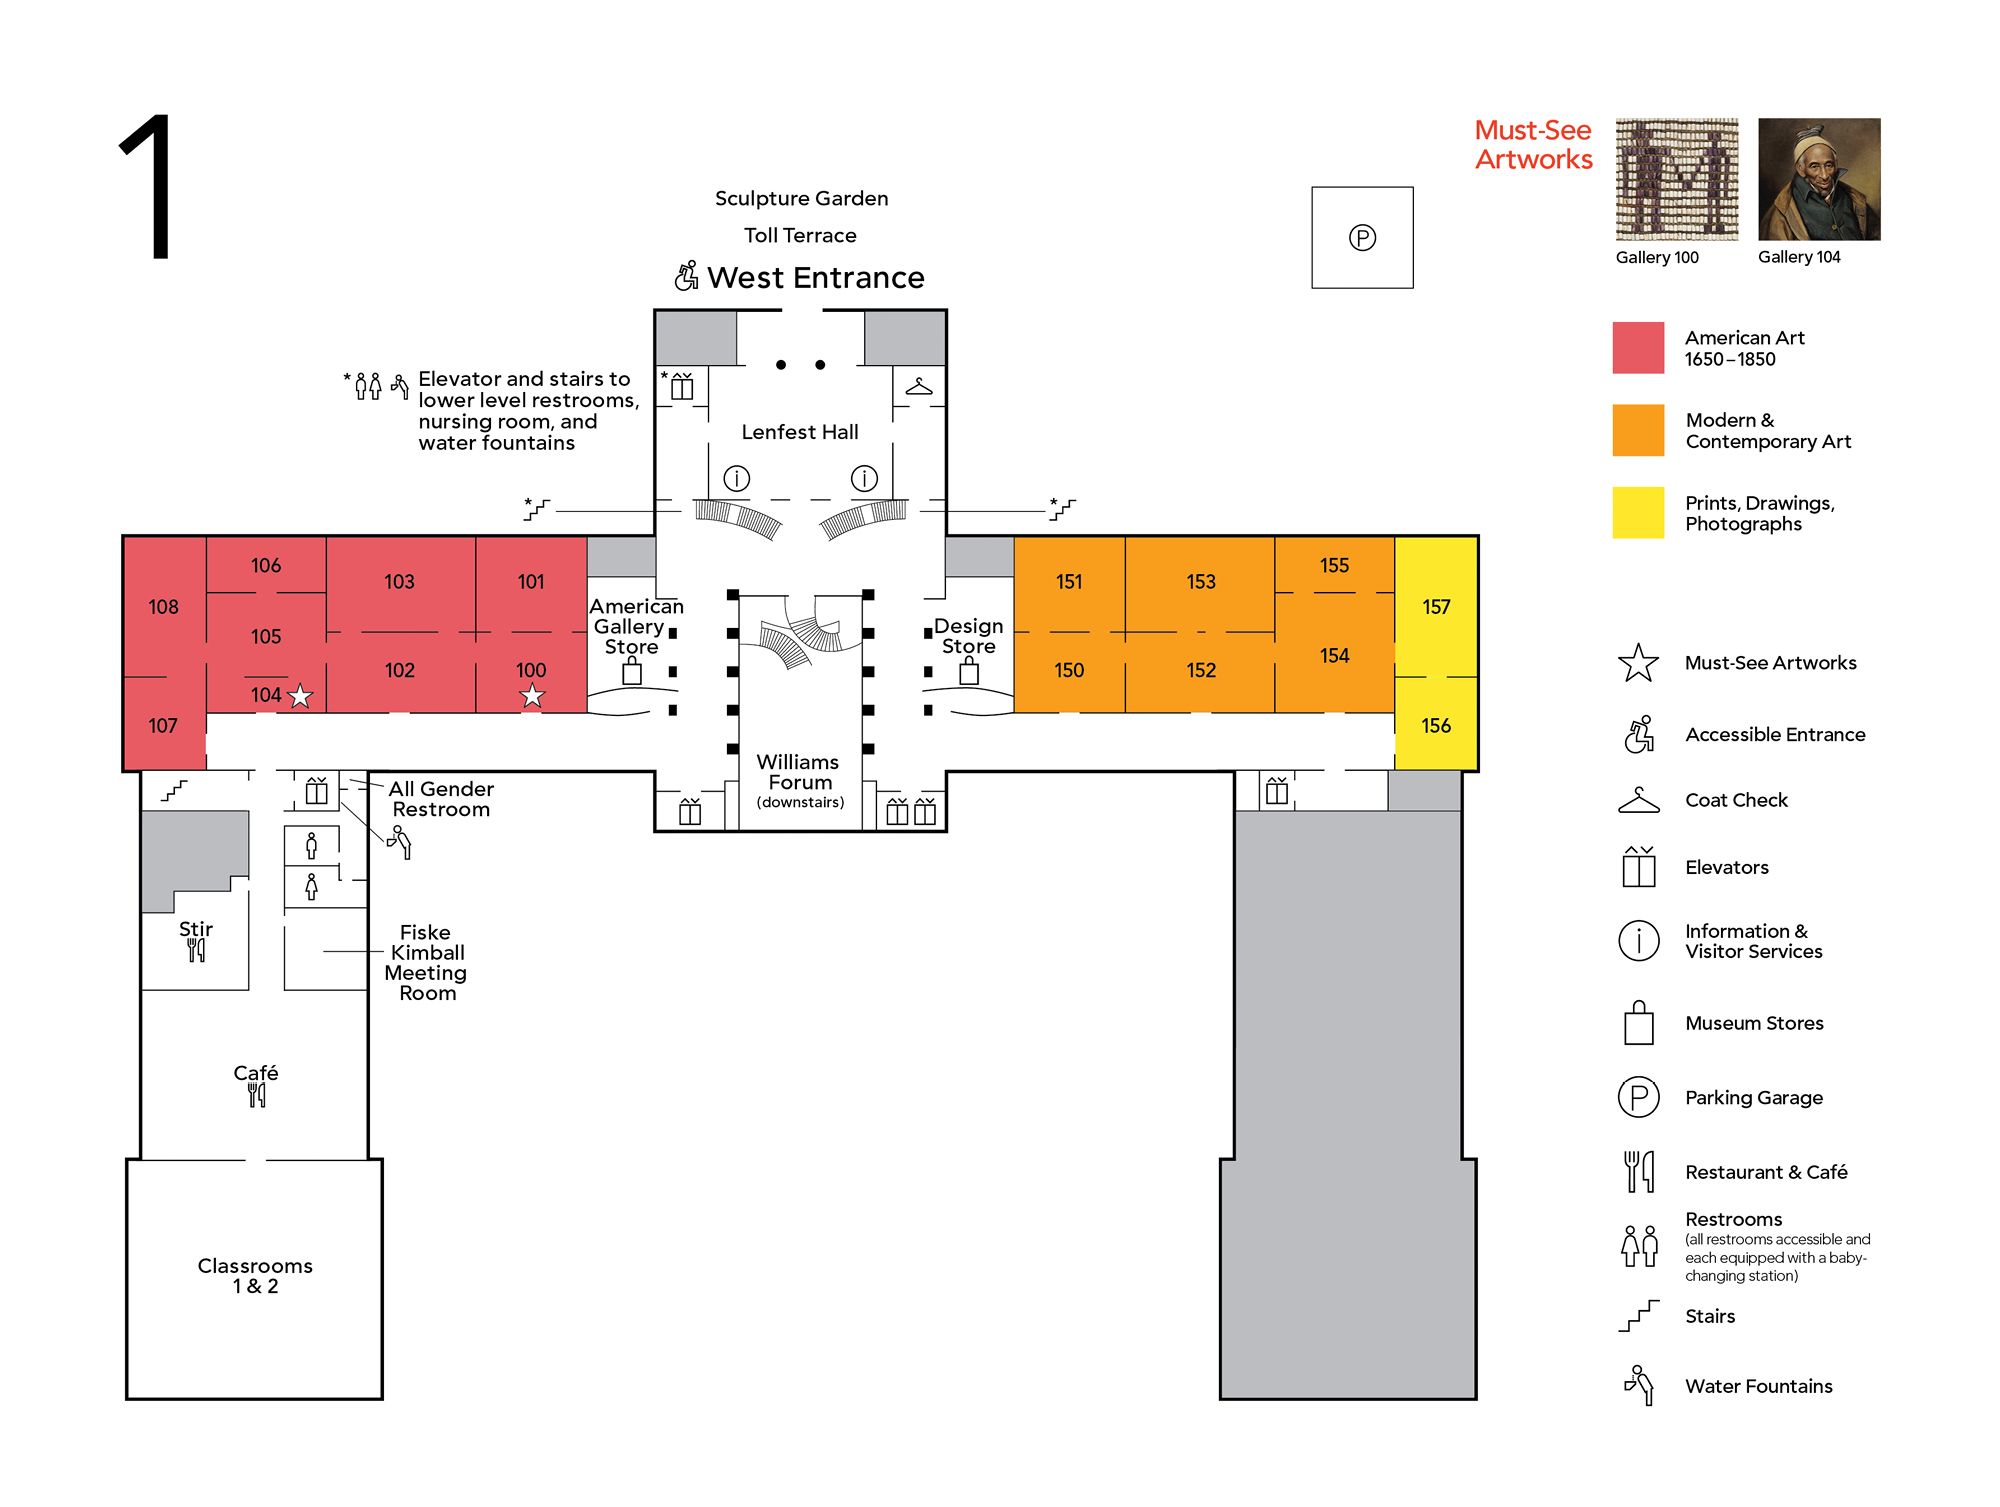 A map showing the first floor layout of the Philadelphia Museum of Art.